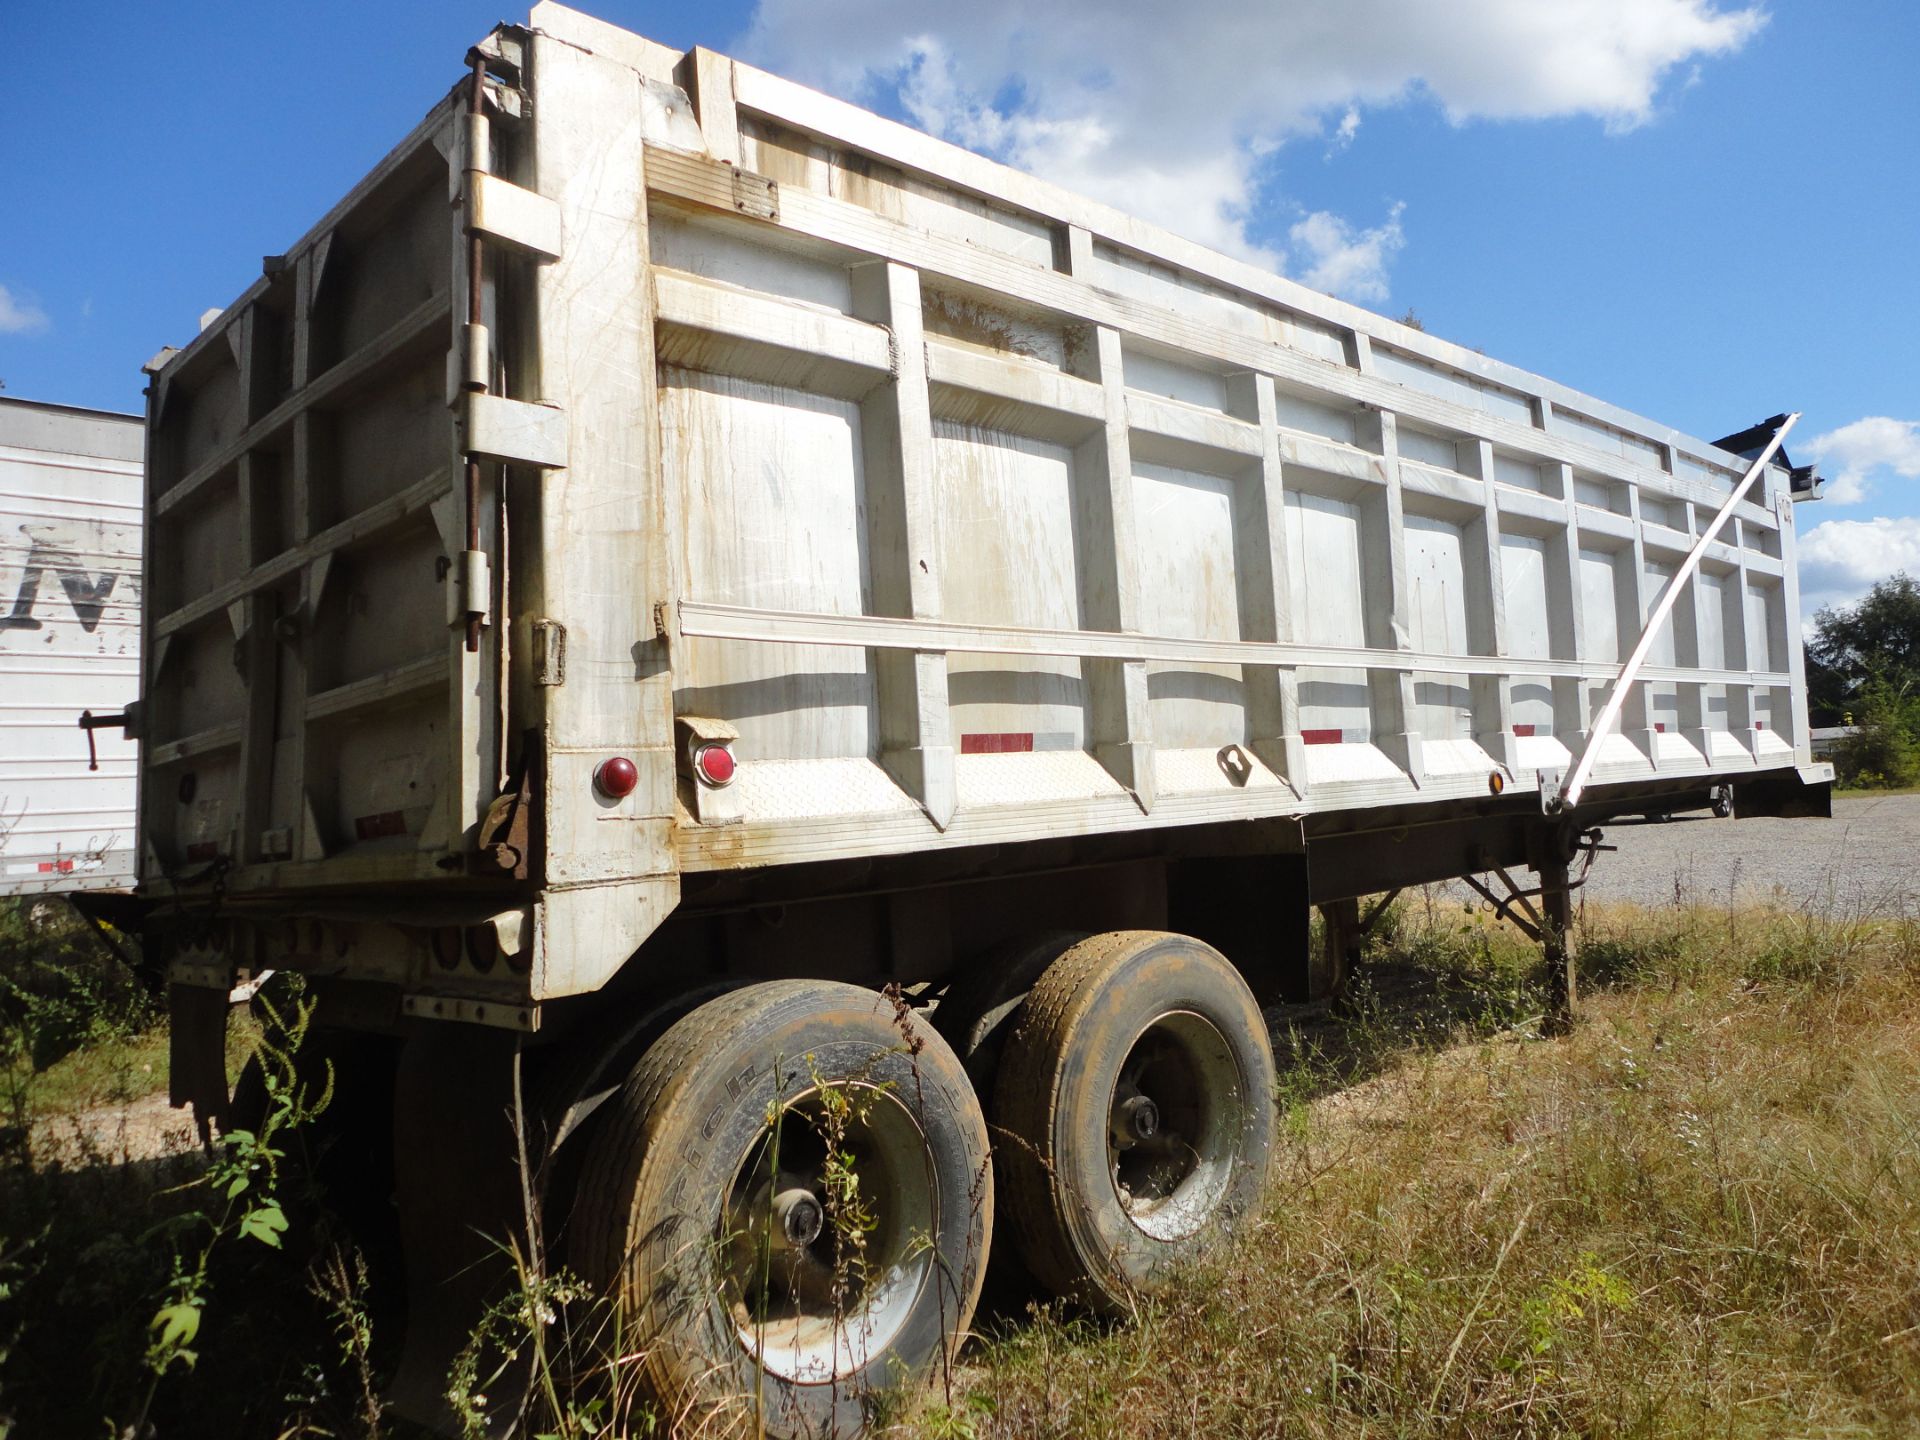 96" WIDE X 30' LONG X 75" HIGH SIDES EAST STEEL FRAME ALUMINUM BED TANDEM AXLE HYDRAULIC DUMP - Image 4 of 8